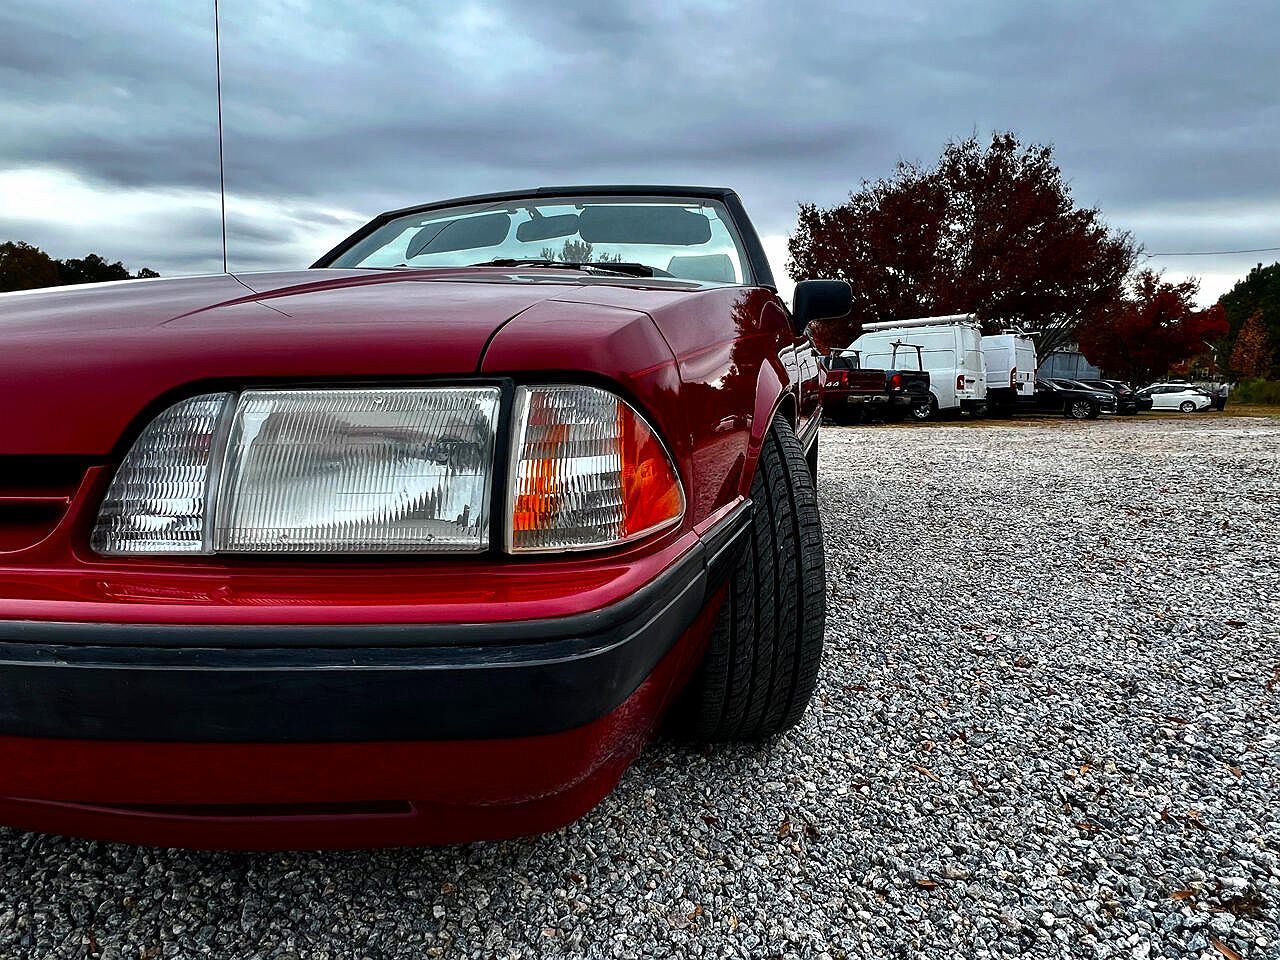 1988 Ford Mustang LX image 18